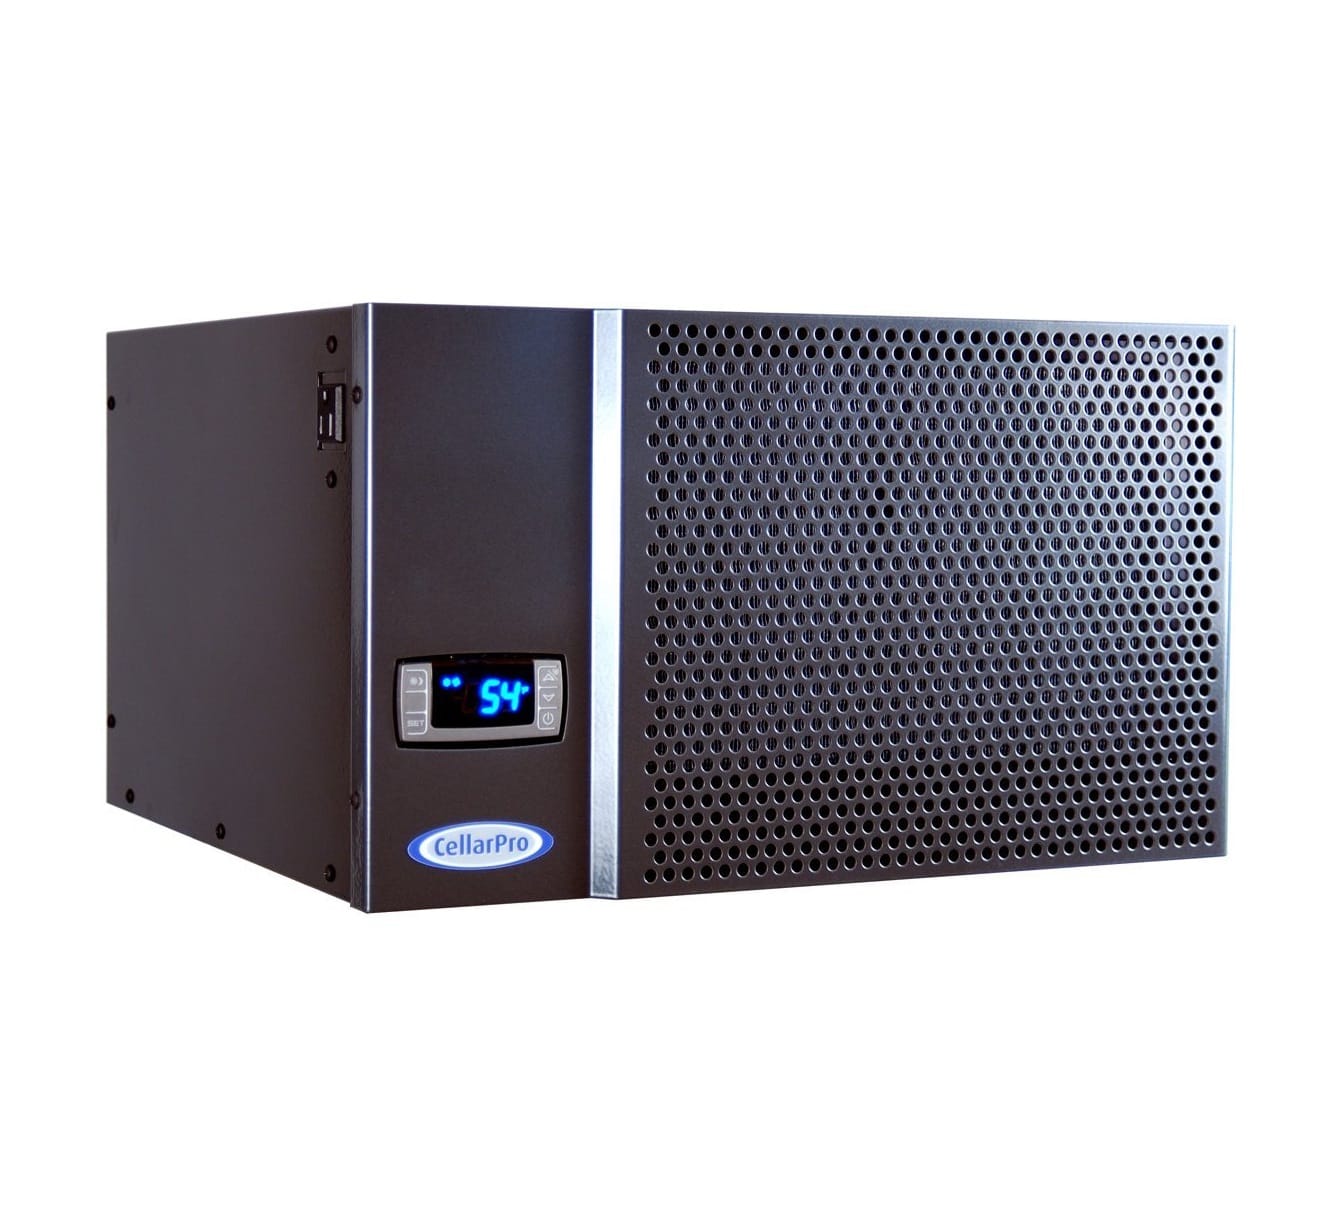 7 Best Wine Cellar Cooling Units On The Market (2019)